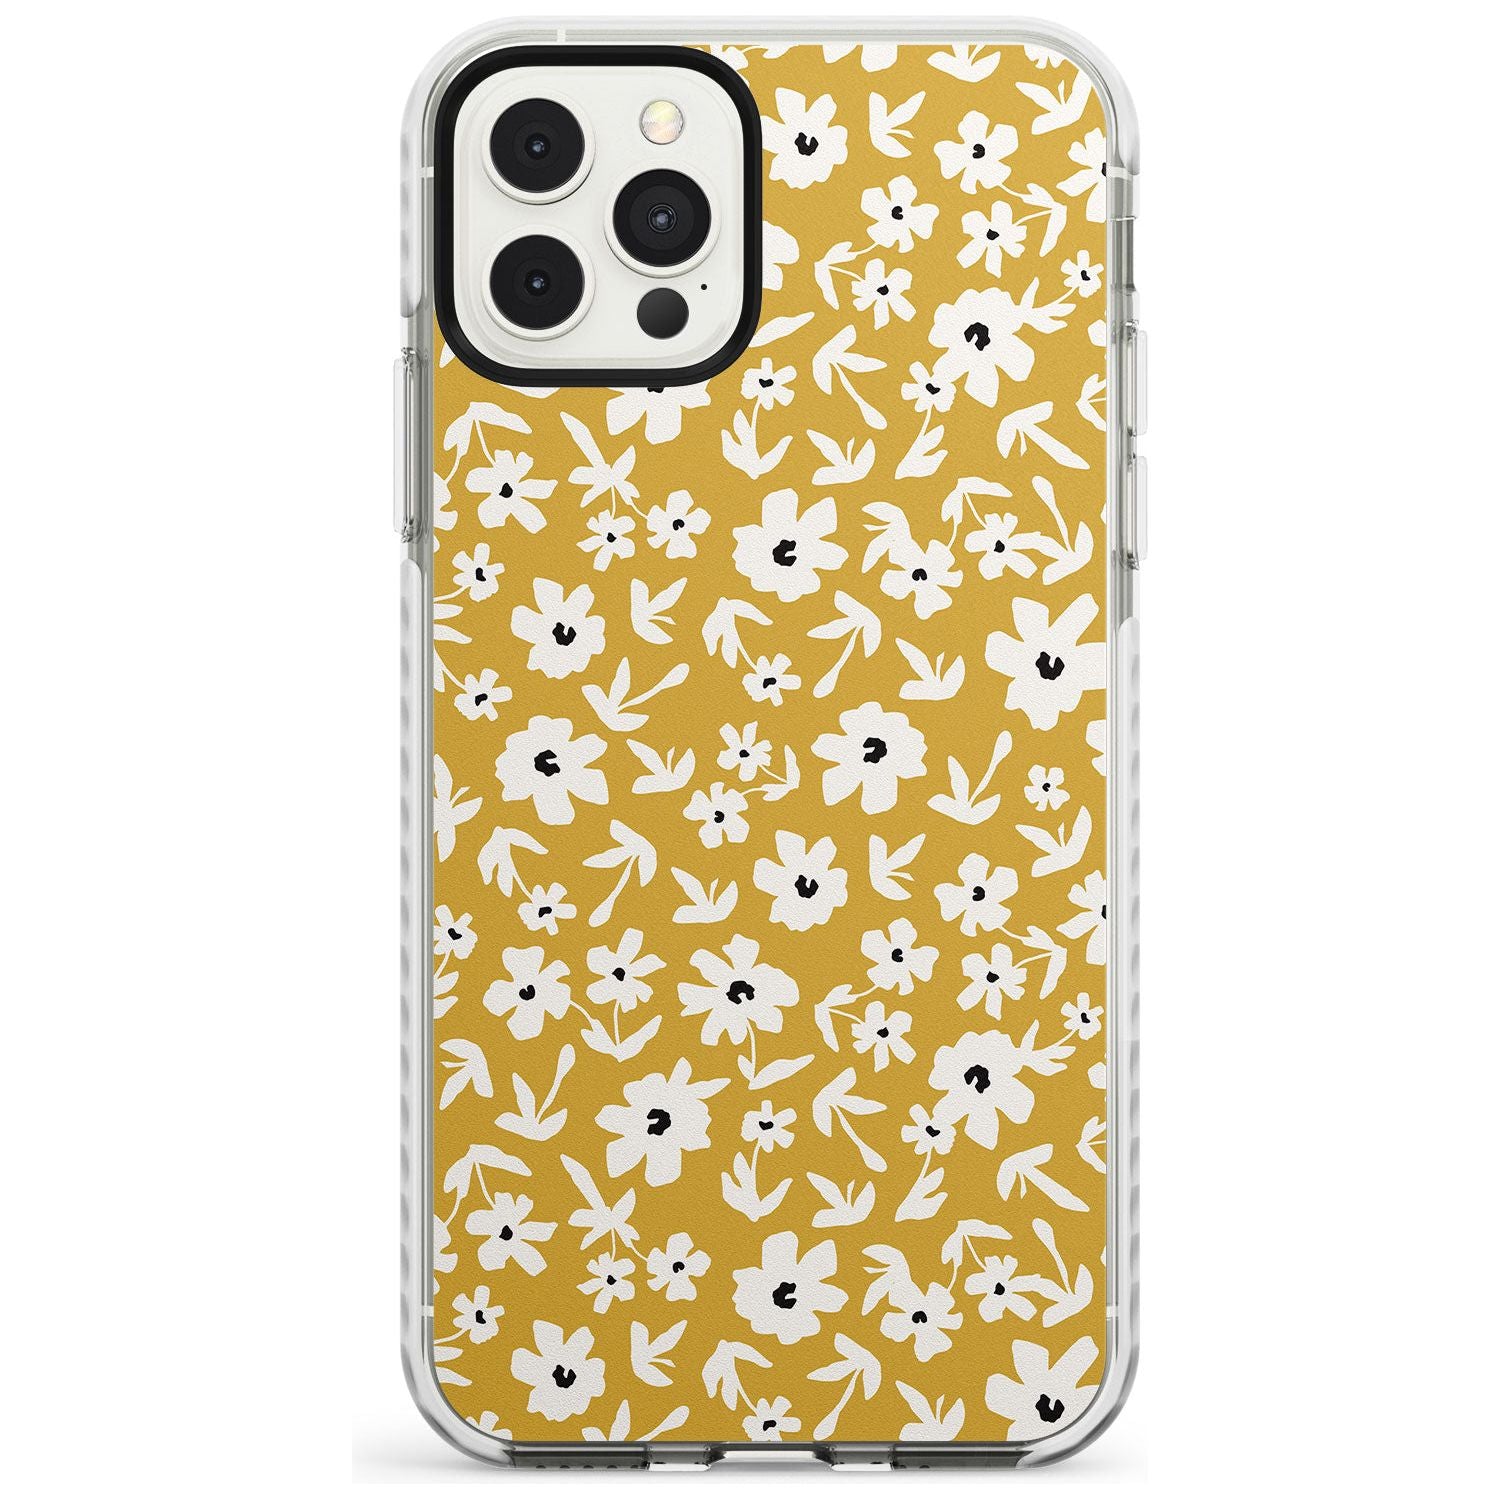 Floral Print on Mustard - Cute Floral Design Slim TPU Phone Case for iPhone 11 Pro Max